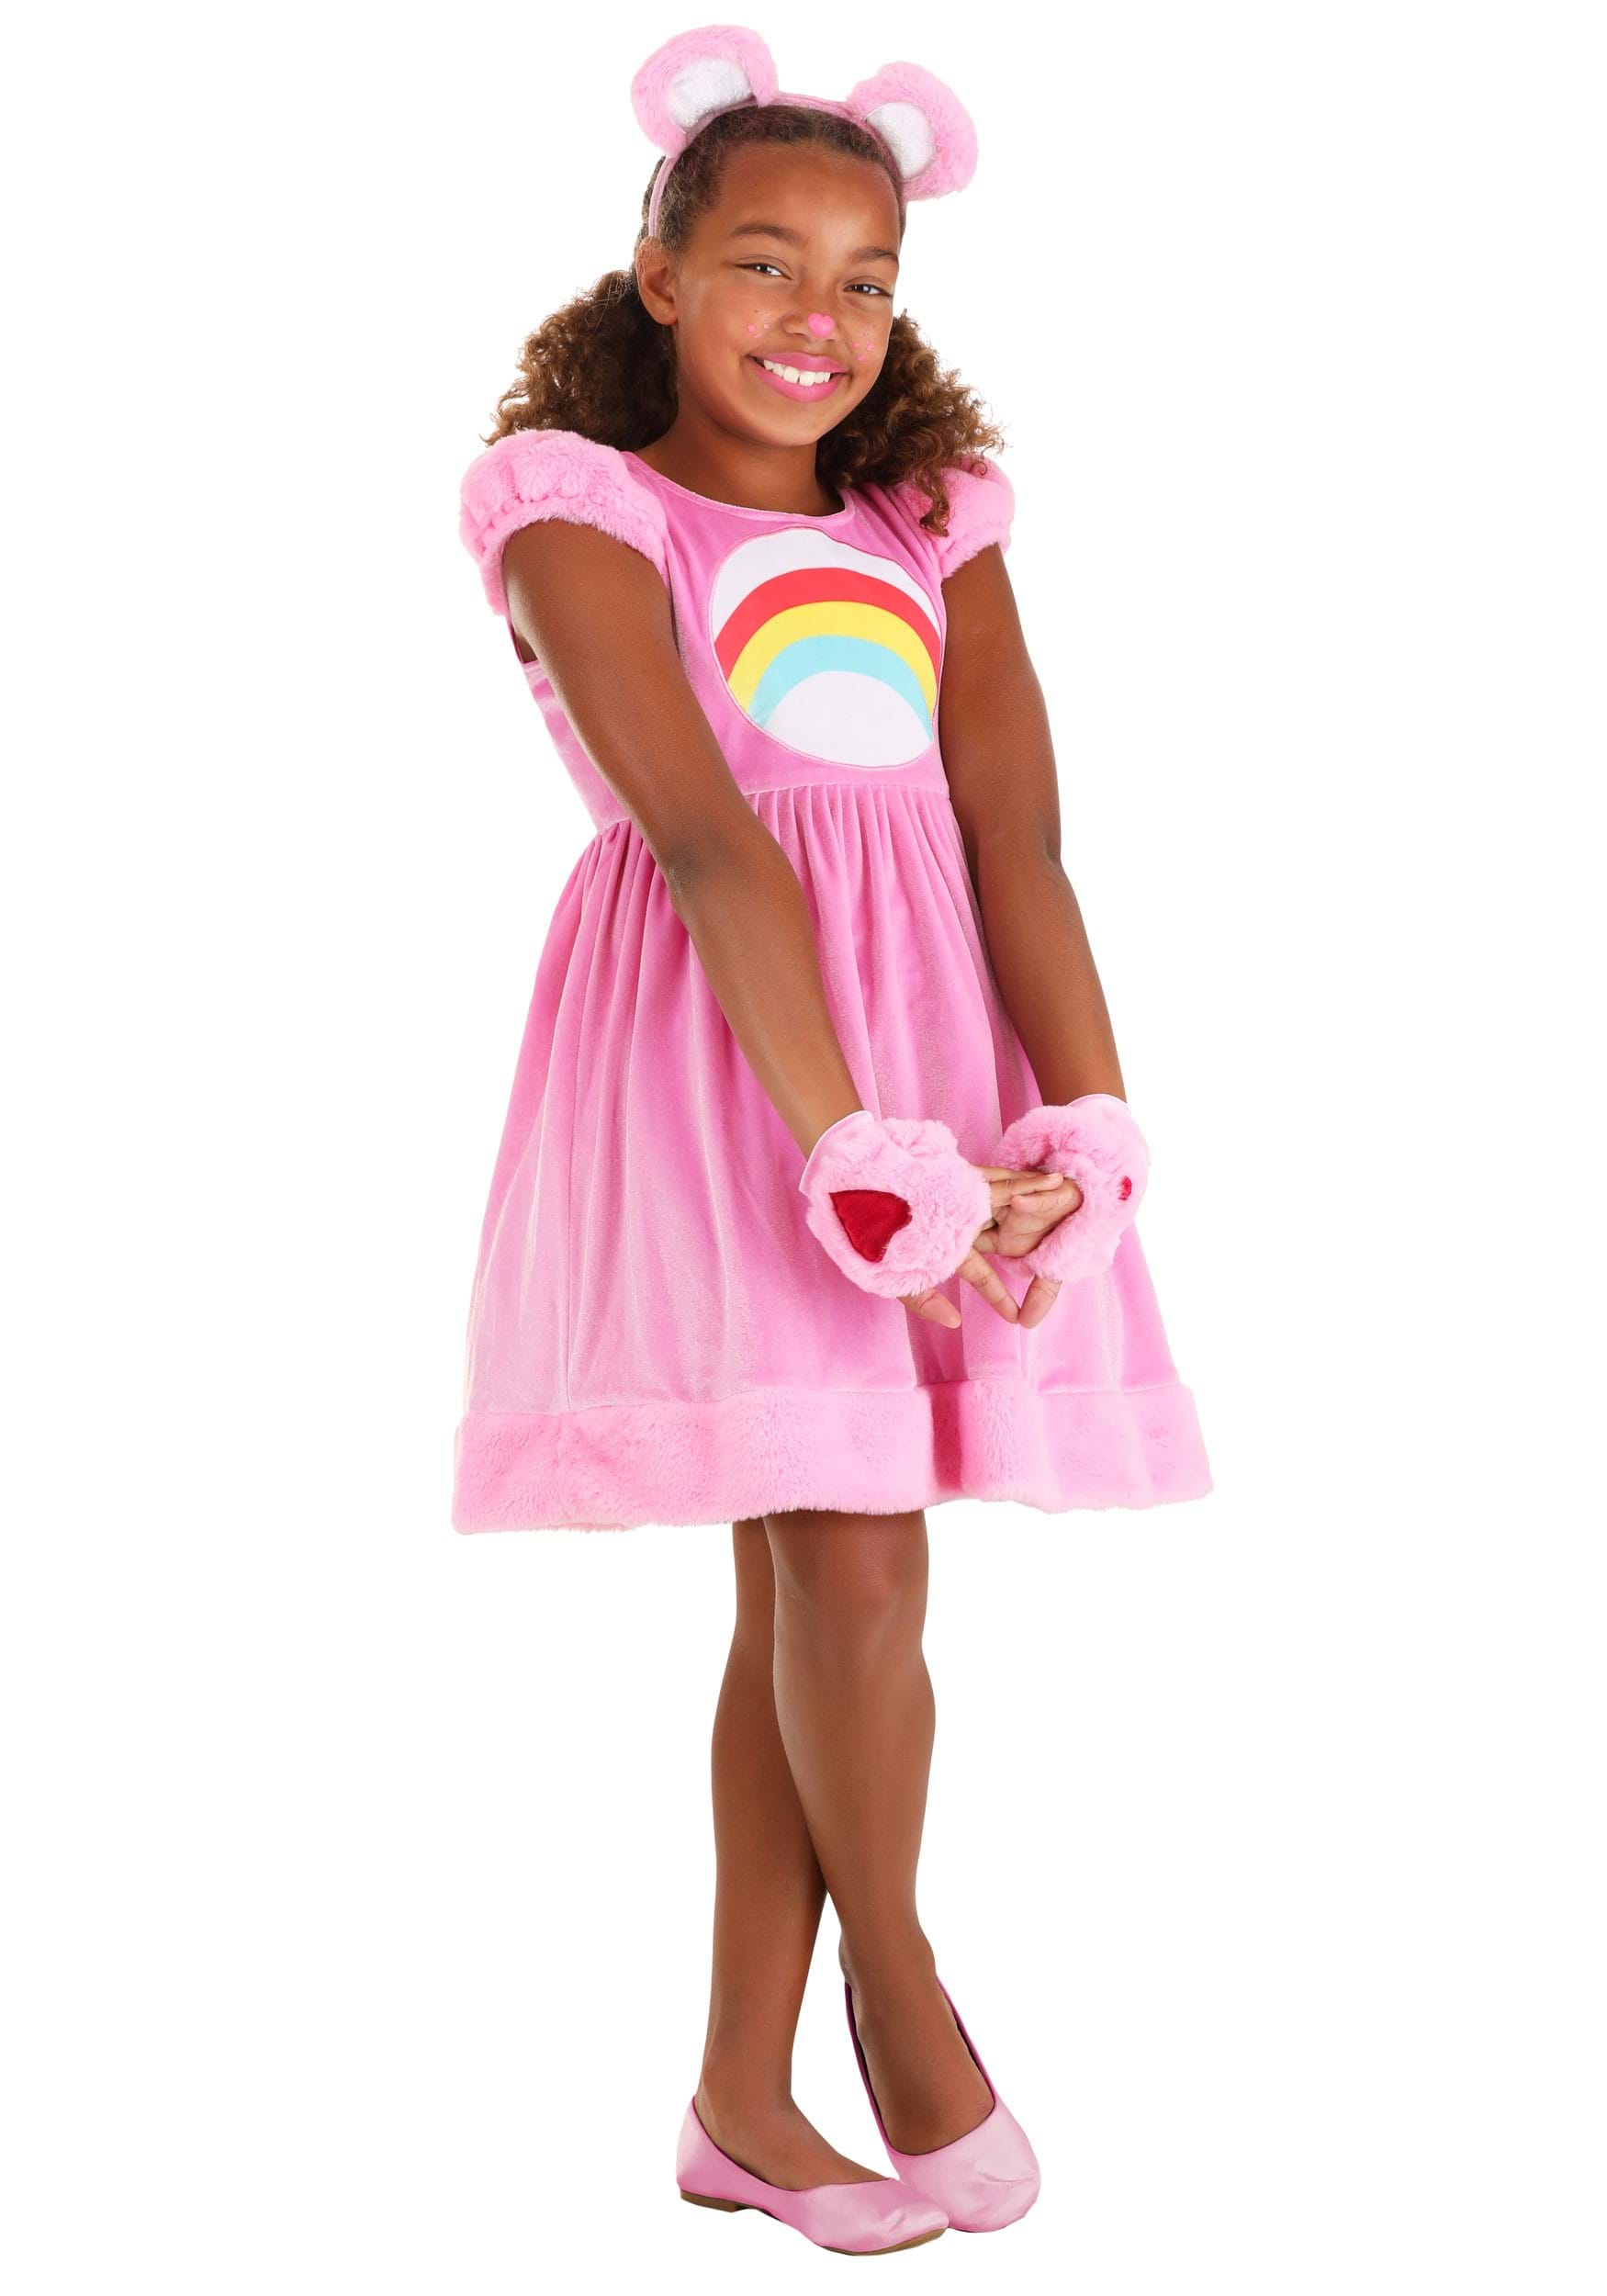 Photos - Fancy Dress BEAR FUN Costumes Cheer  Party Dress Care  Costume for Kids Pink/Re 